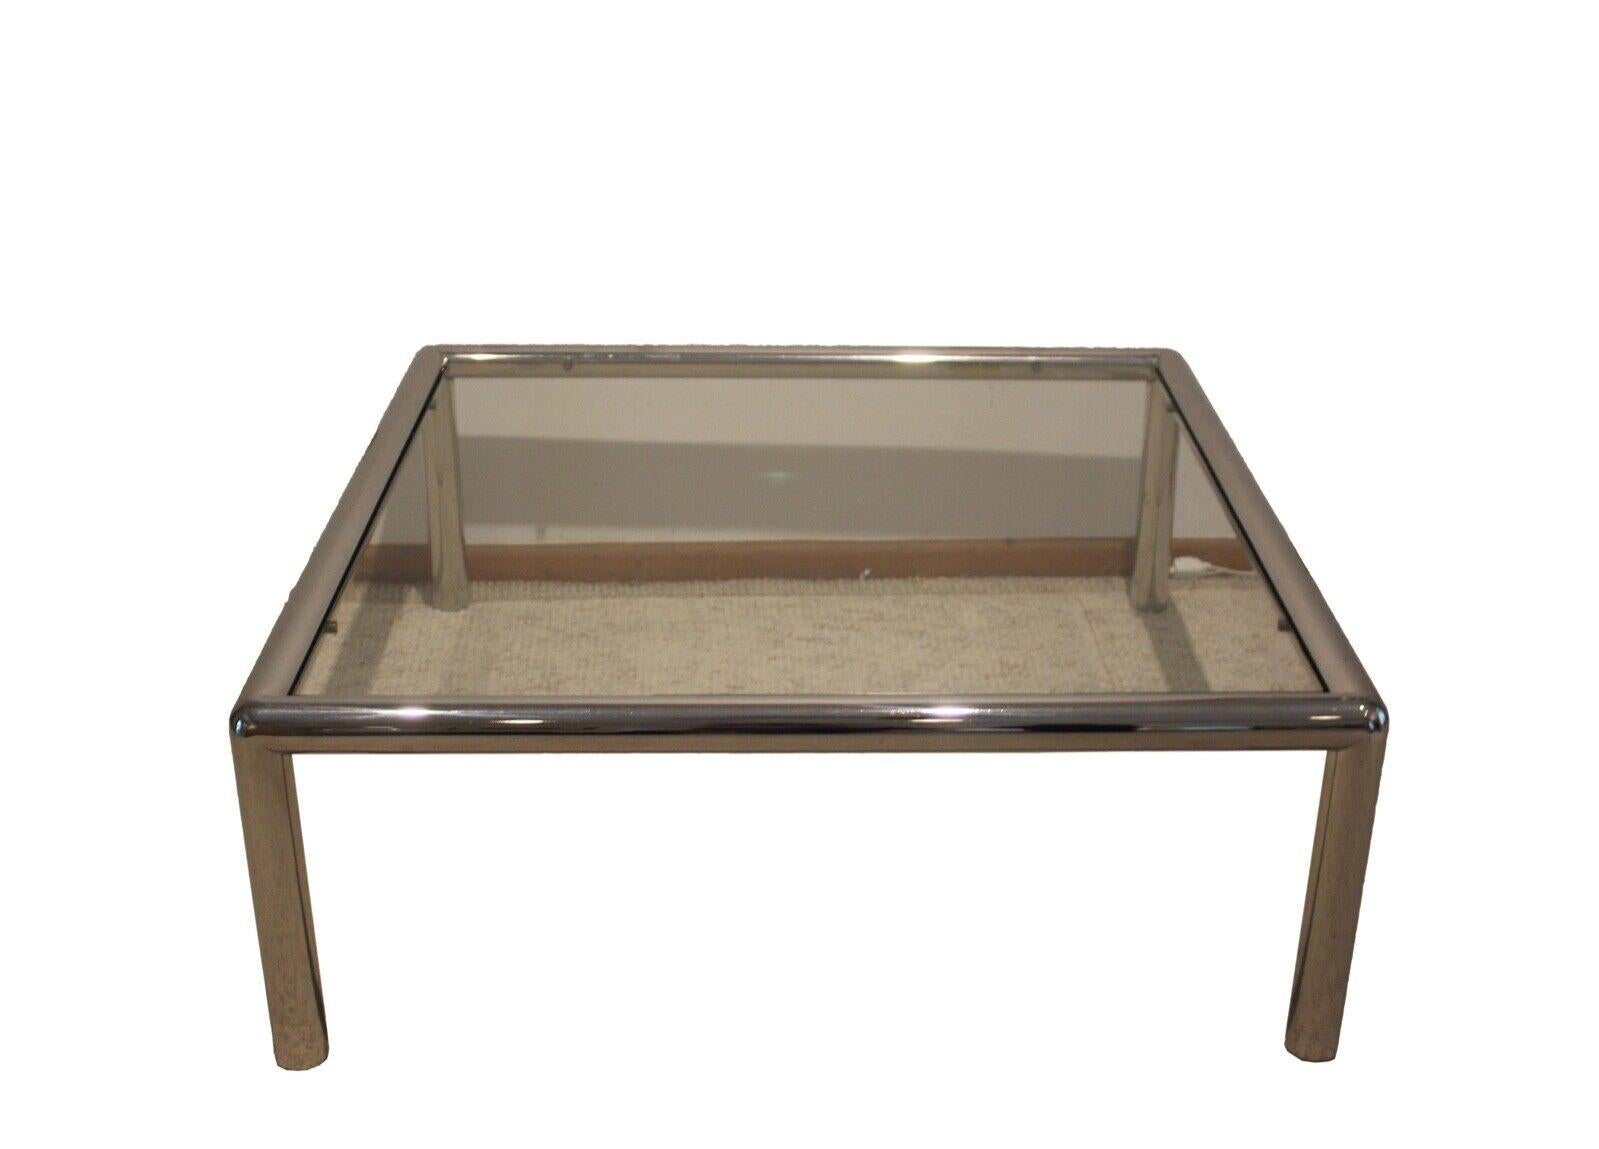 Le Shoppe Too presents this beautiful coffee seemless designed polished chrome and glass square coffee table. In very good vintage condition. Dimensions: 40